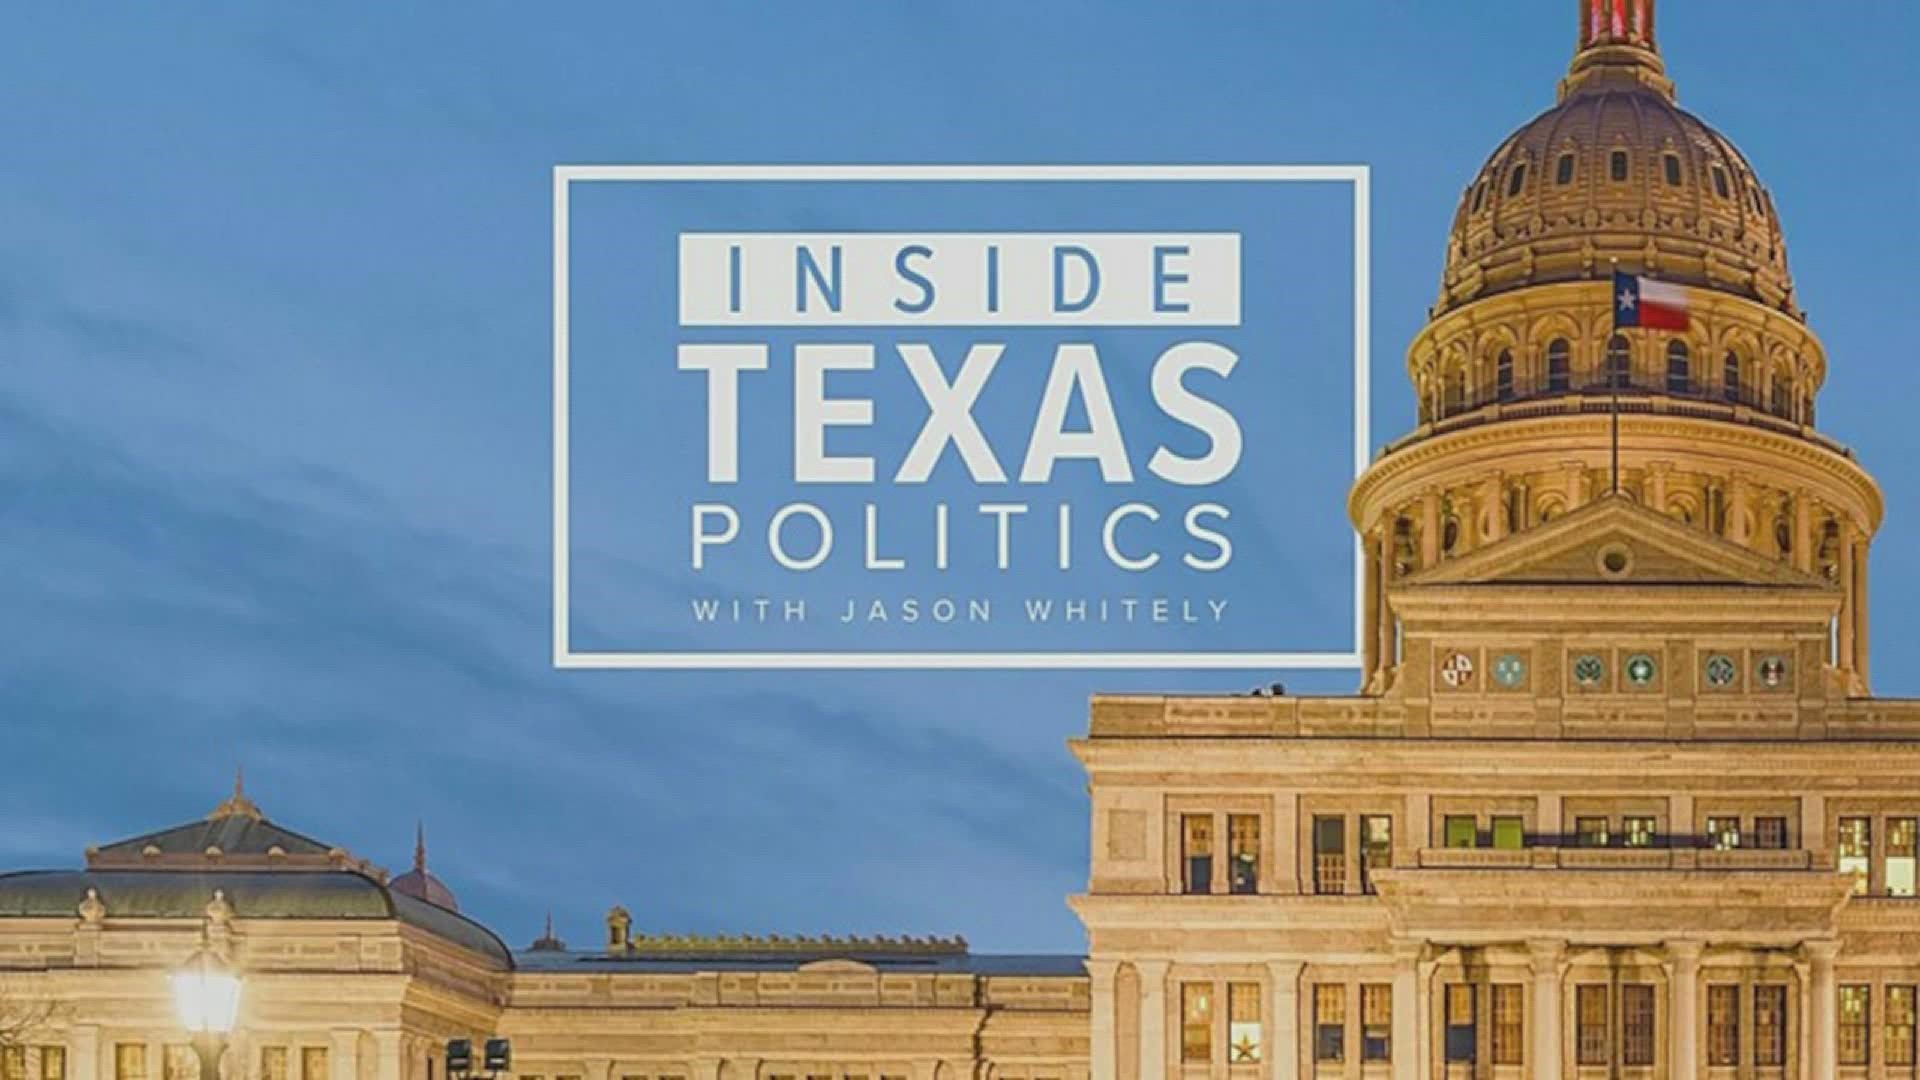 WFAA's Jason Whitely and Berna Dean Steptoe lead discussions with local lawmakers and community leaders, providing in-depth analysis of Texas politics.